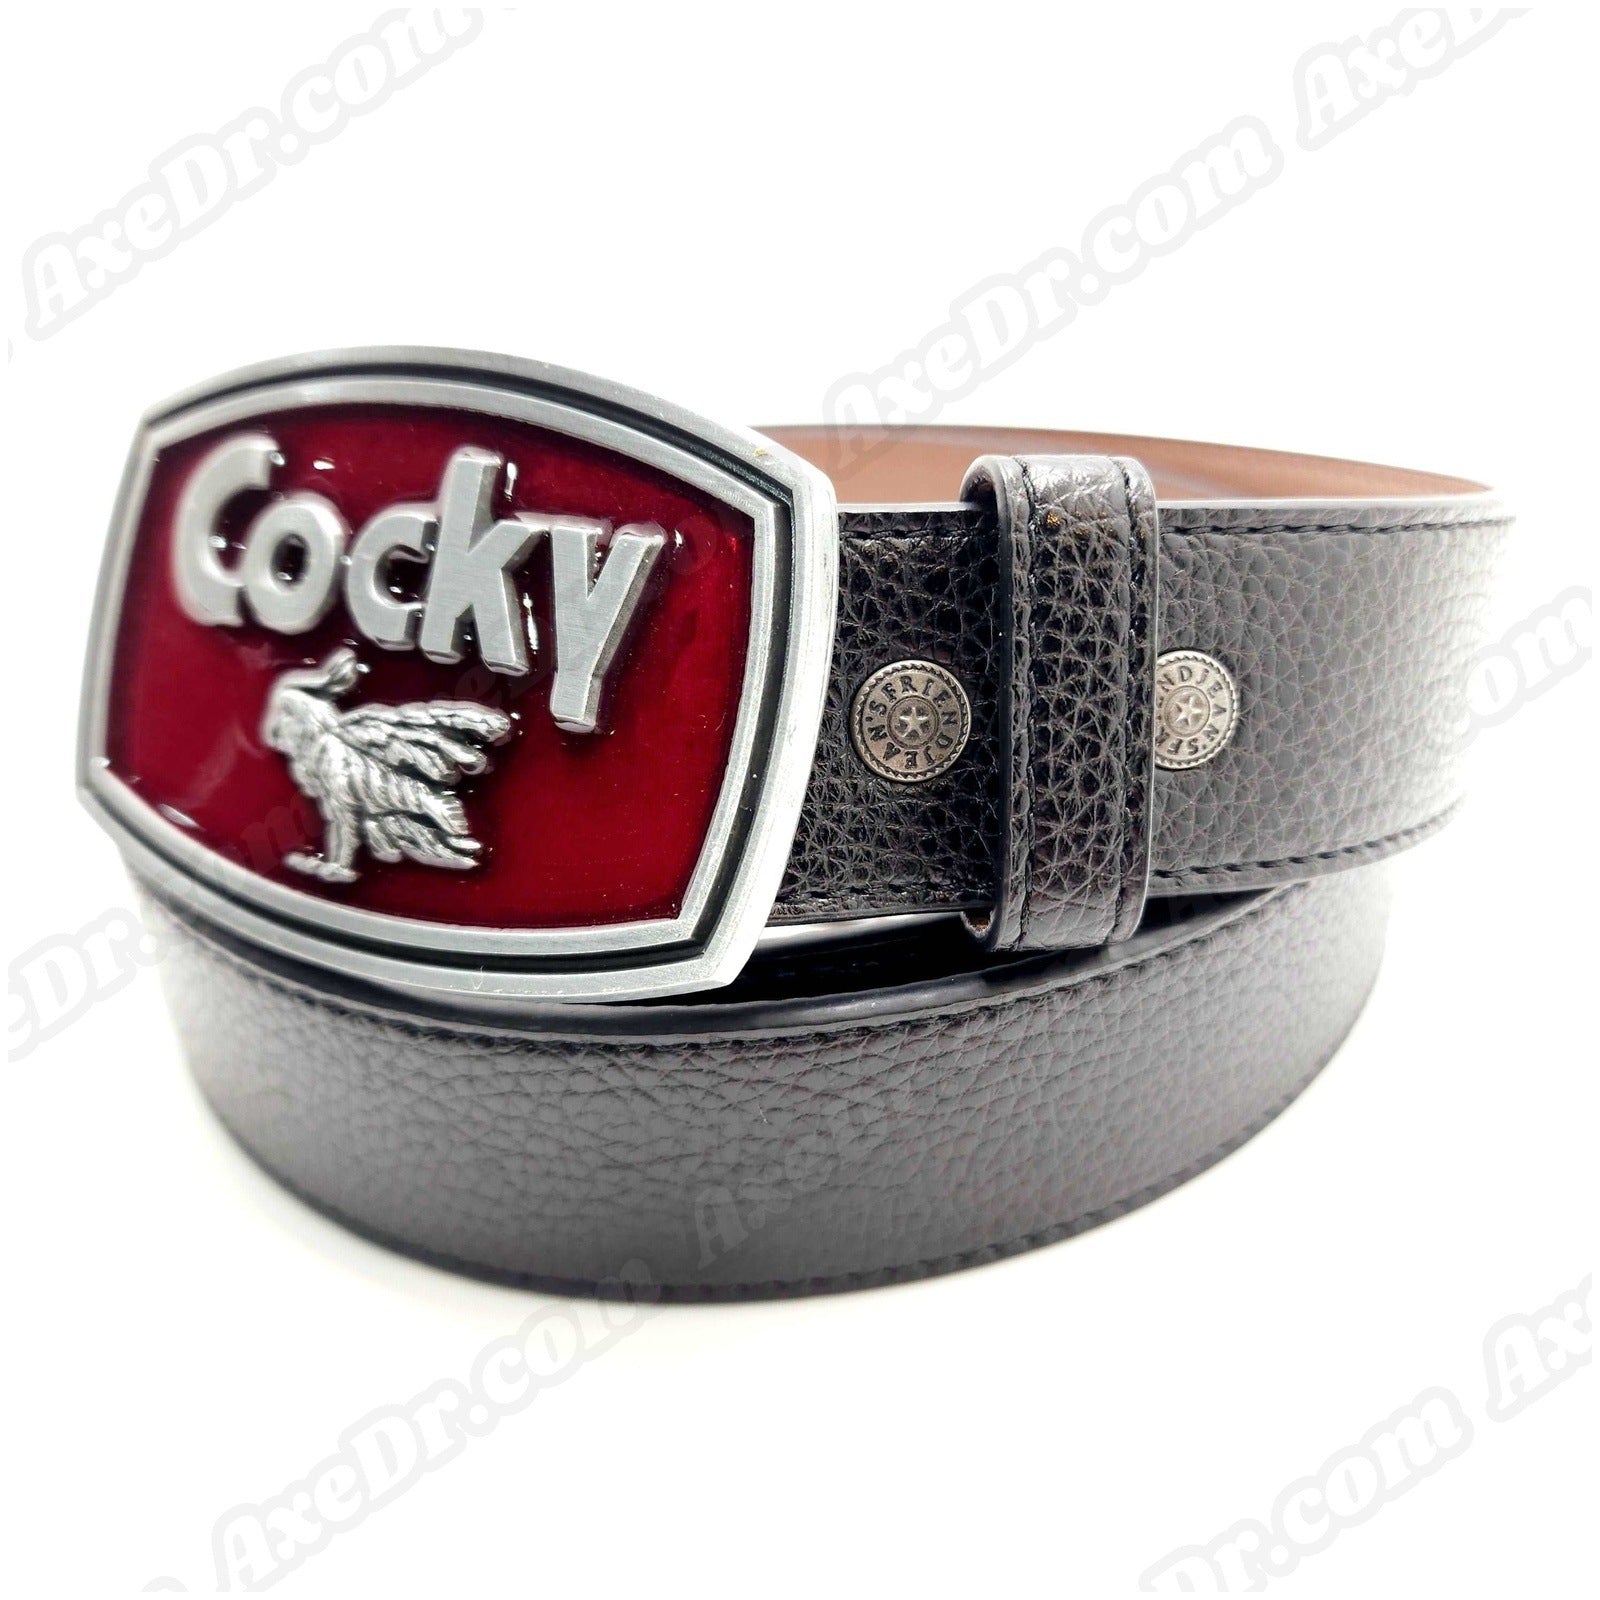 Cocky Belt Buckle w/ Vegan Leather Snap Button Belt shop.AxeDr.com Belt Buckle, Belt with Buckle, Bones, Buckles with Belt, Cocky, Funny, Funny Belt Buckle, Gag Gift, 